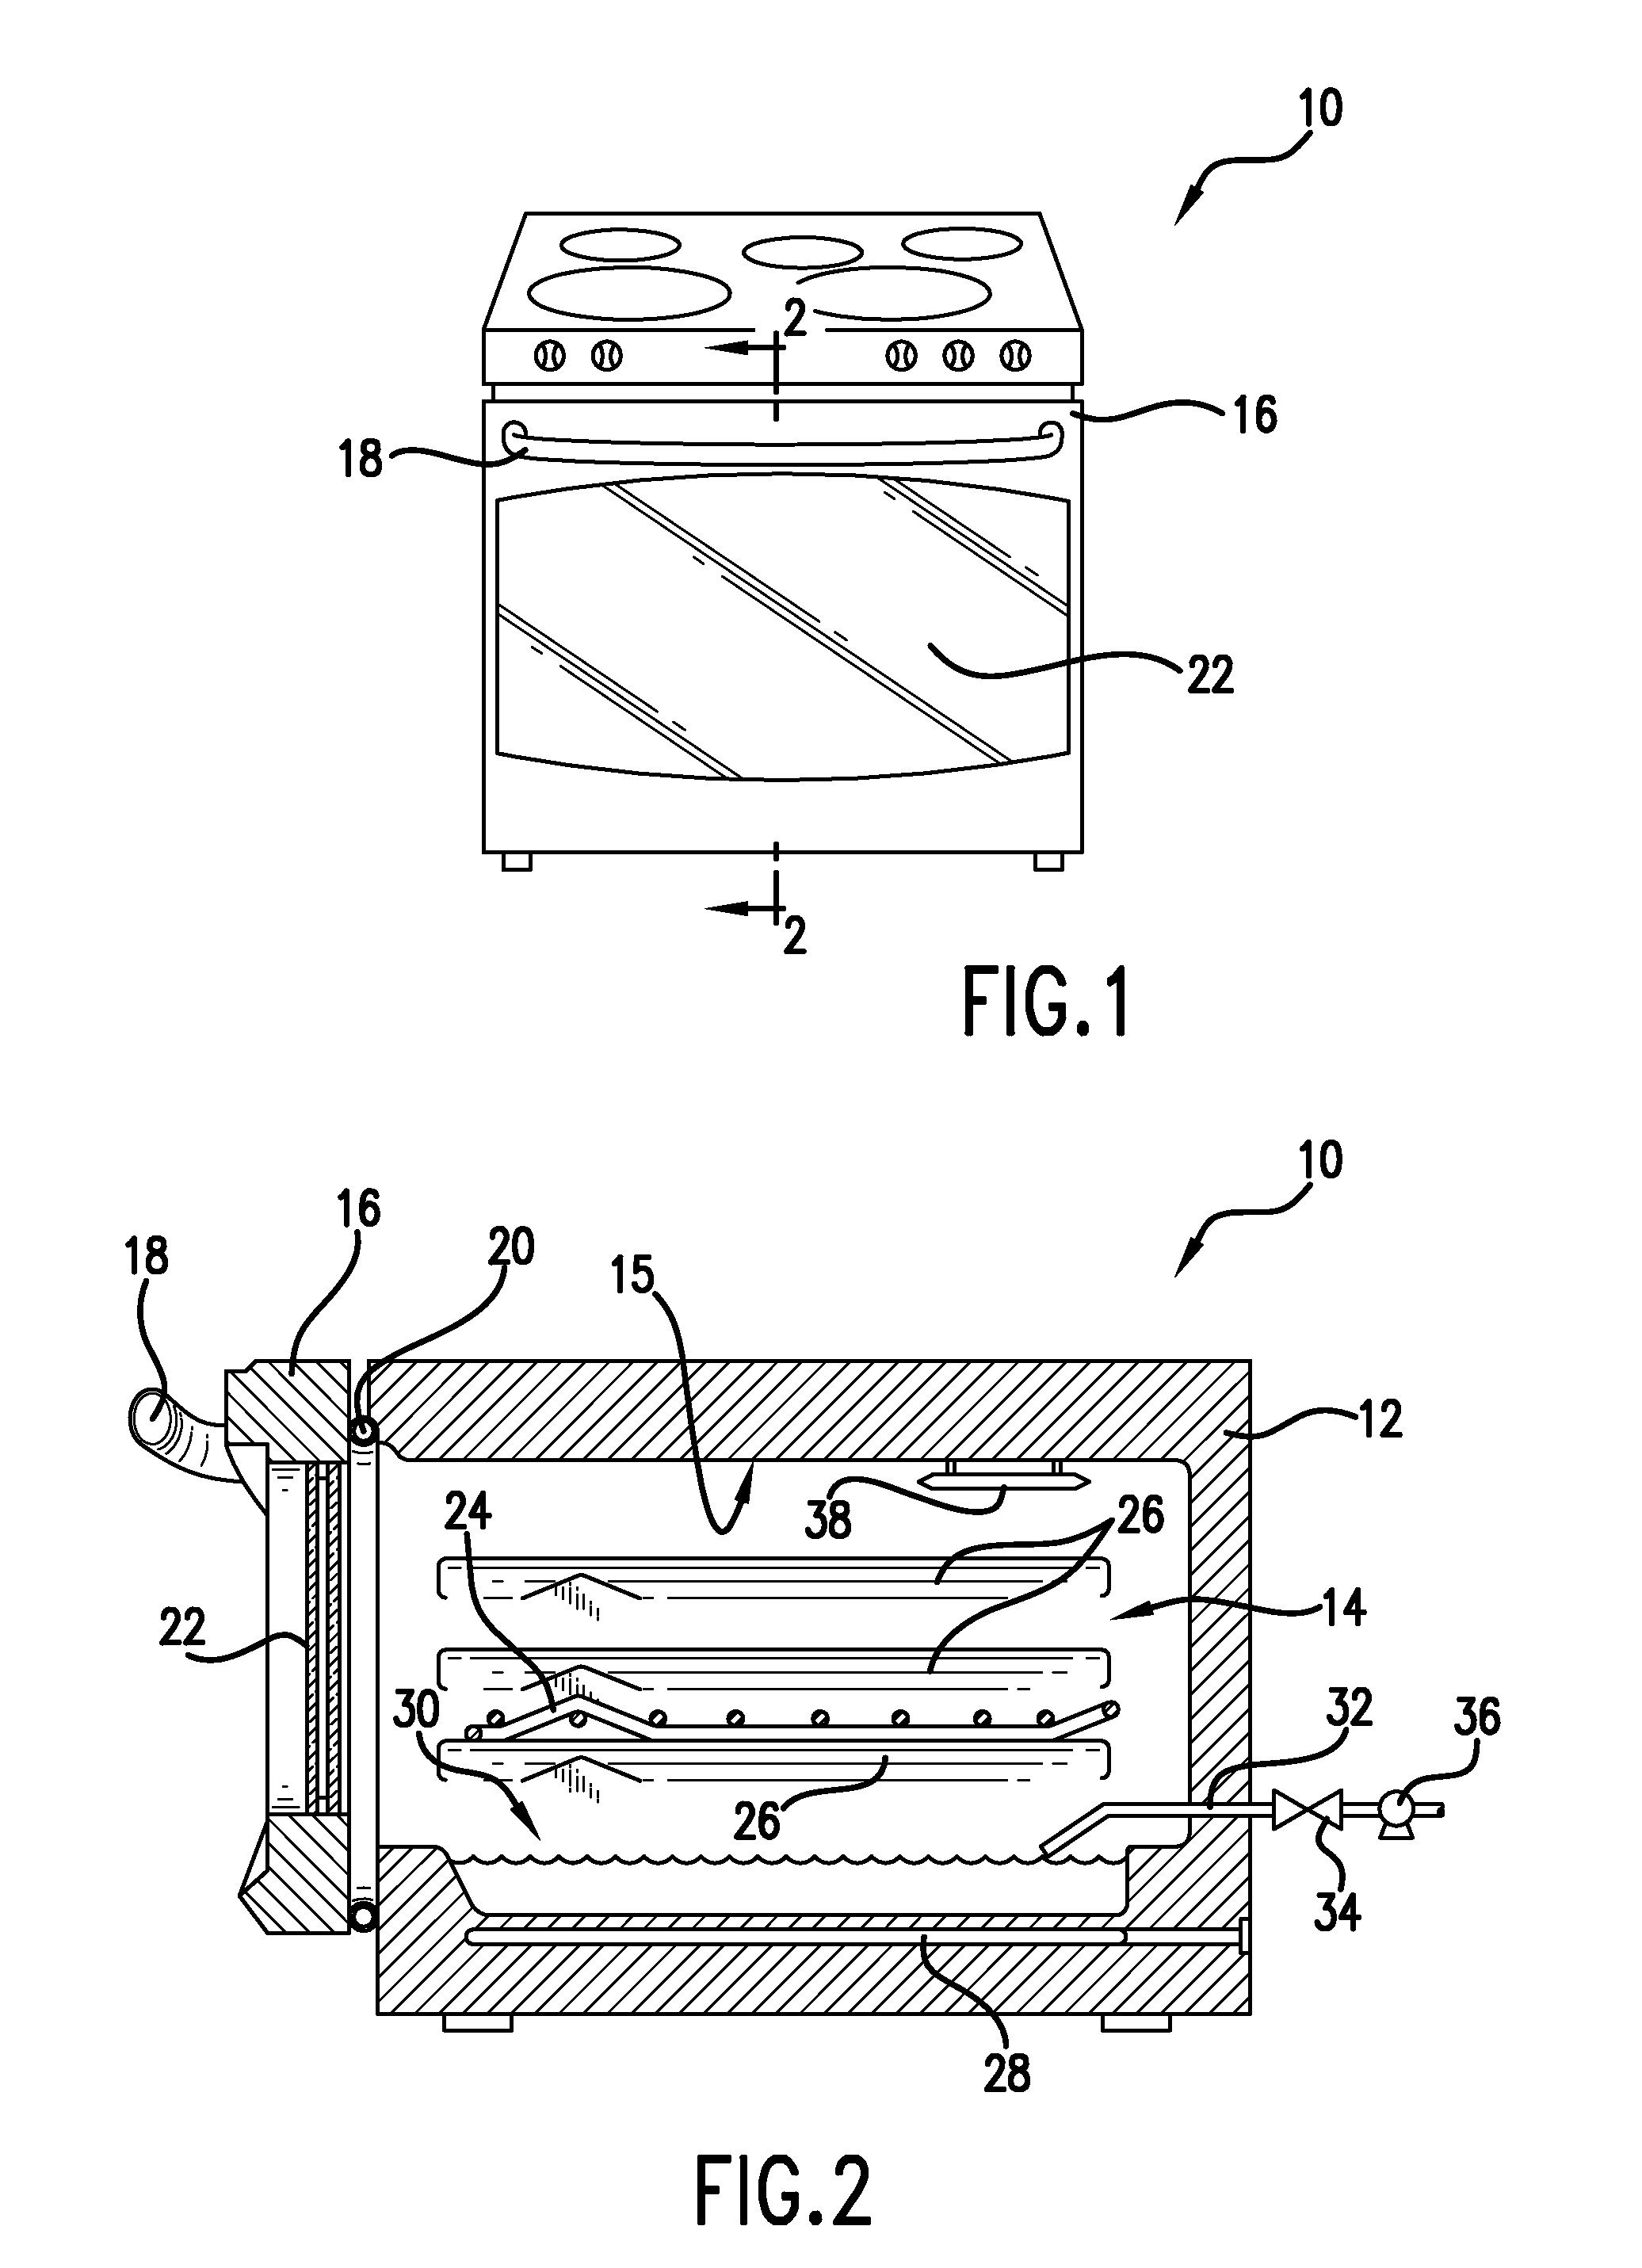 Oven appliance cleaning system using heat and steam cycle